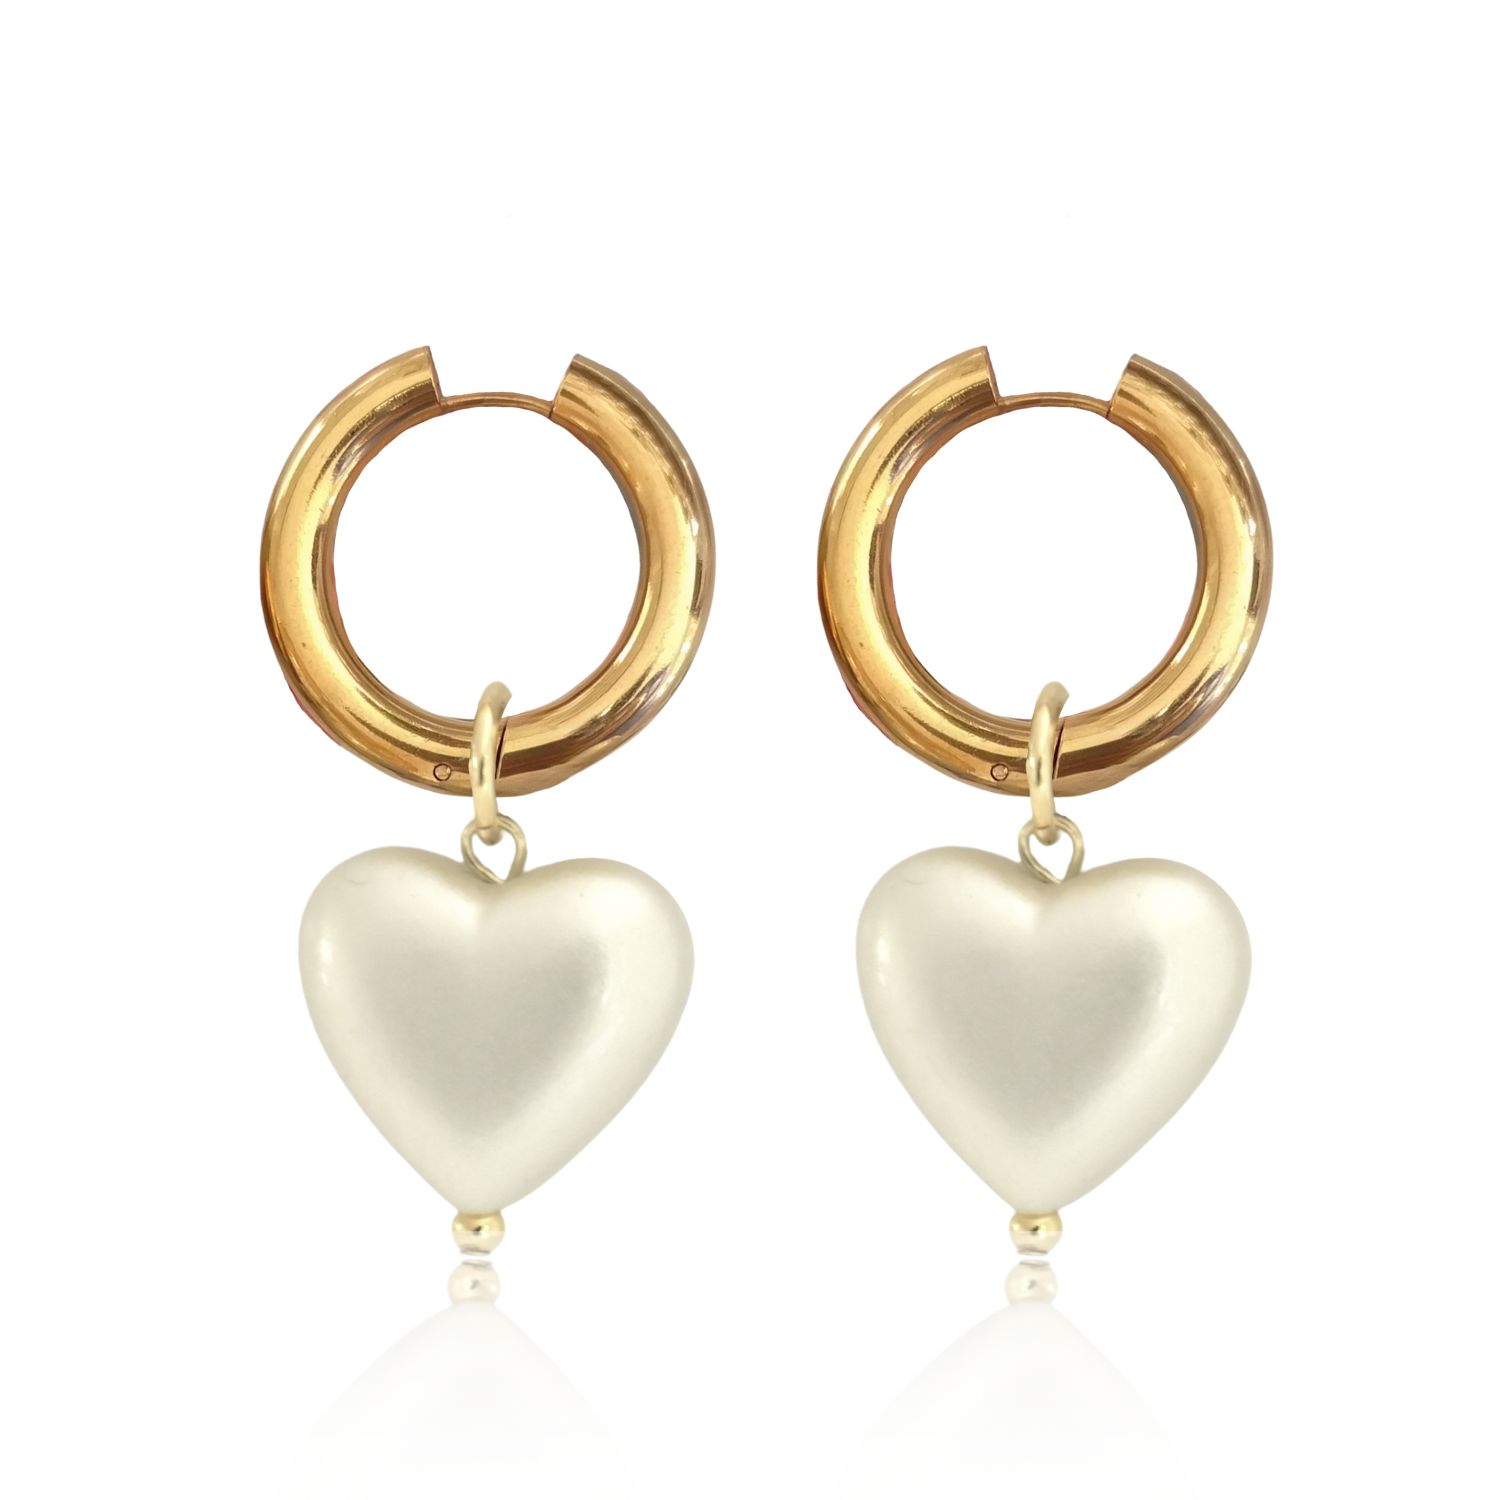 Crafted with gold-plated stainless-steel hoops, these elegant pearl earrings are a charming nod to the classics. Each hoop features a dangling pearl heart pendant, which can be removed to wear the hoops alone or worn with just one heart for a mismatched pair, giving you three pairs of earrings with one purchase. The hoops are designed with comfort and security in mind, featuring a latch closure. Elevate your look with these sophisticated earrings.